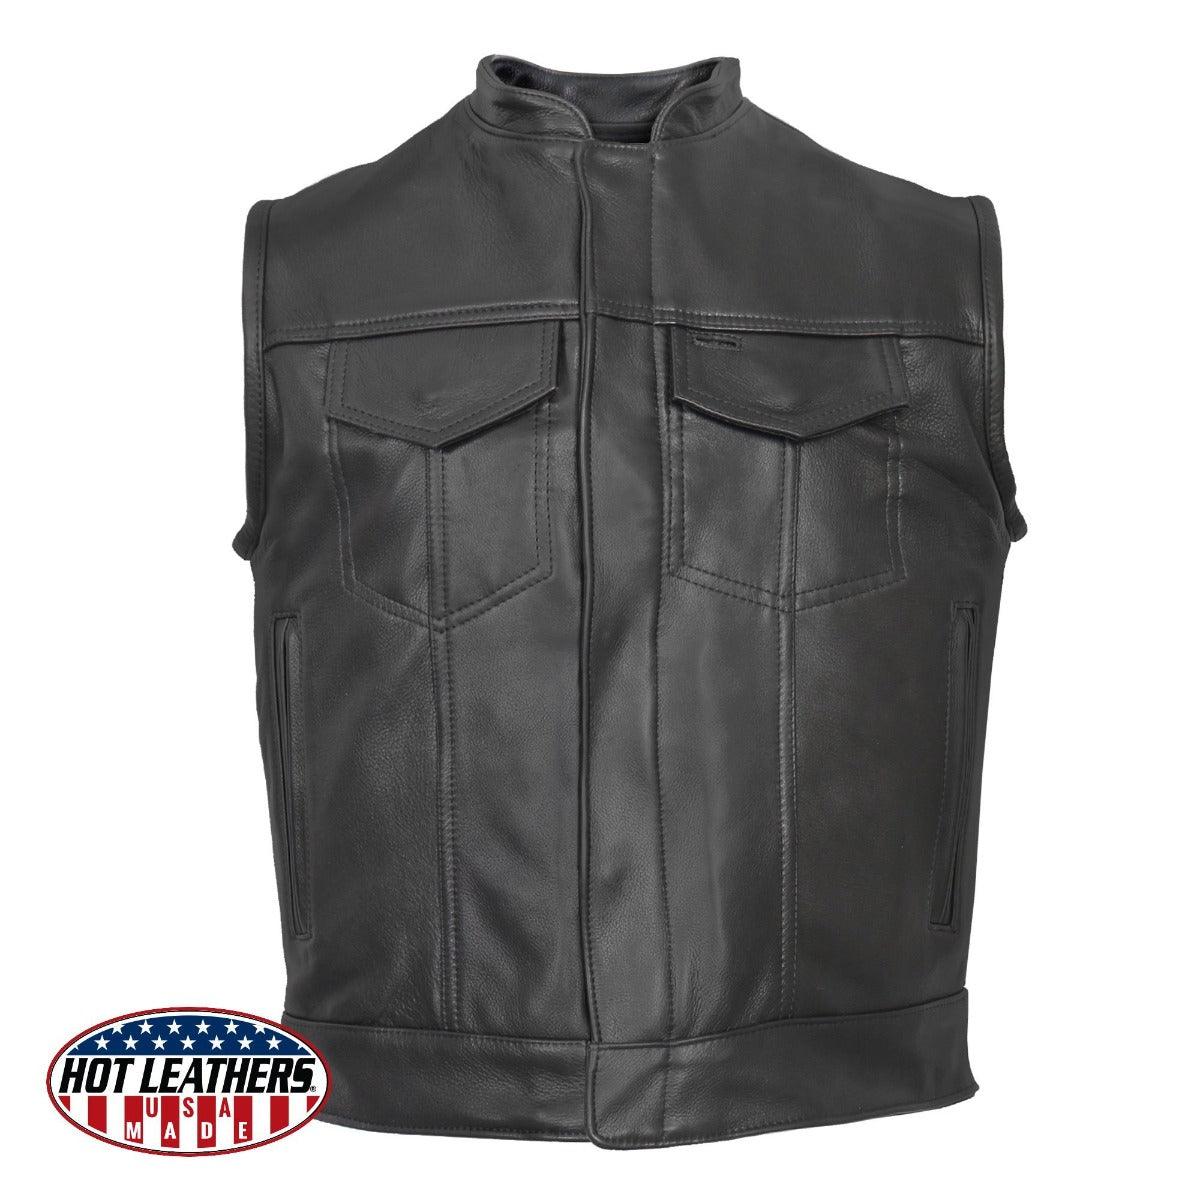 Hot Leathers Men's Usa Made Covered Zipper Premium Leather Club Vest - American Legend Rider